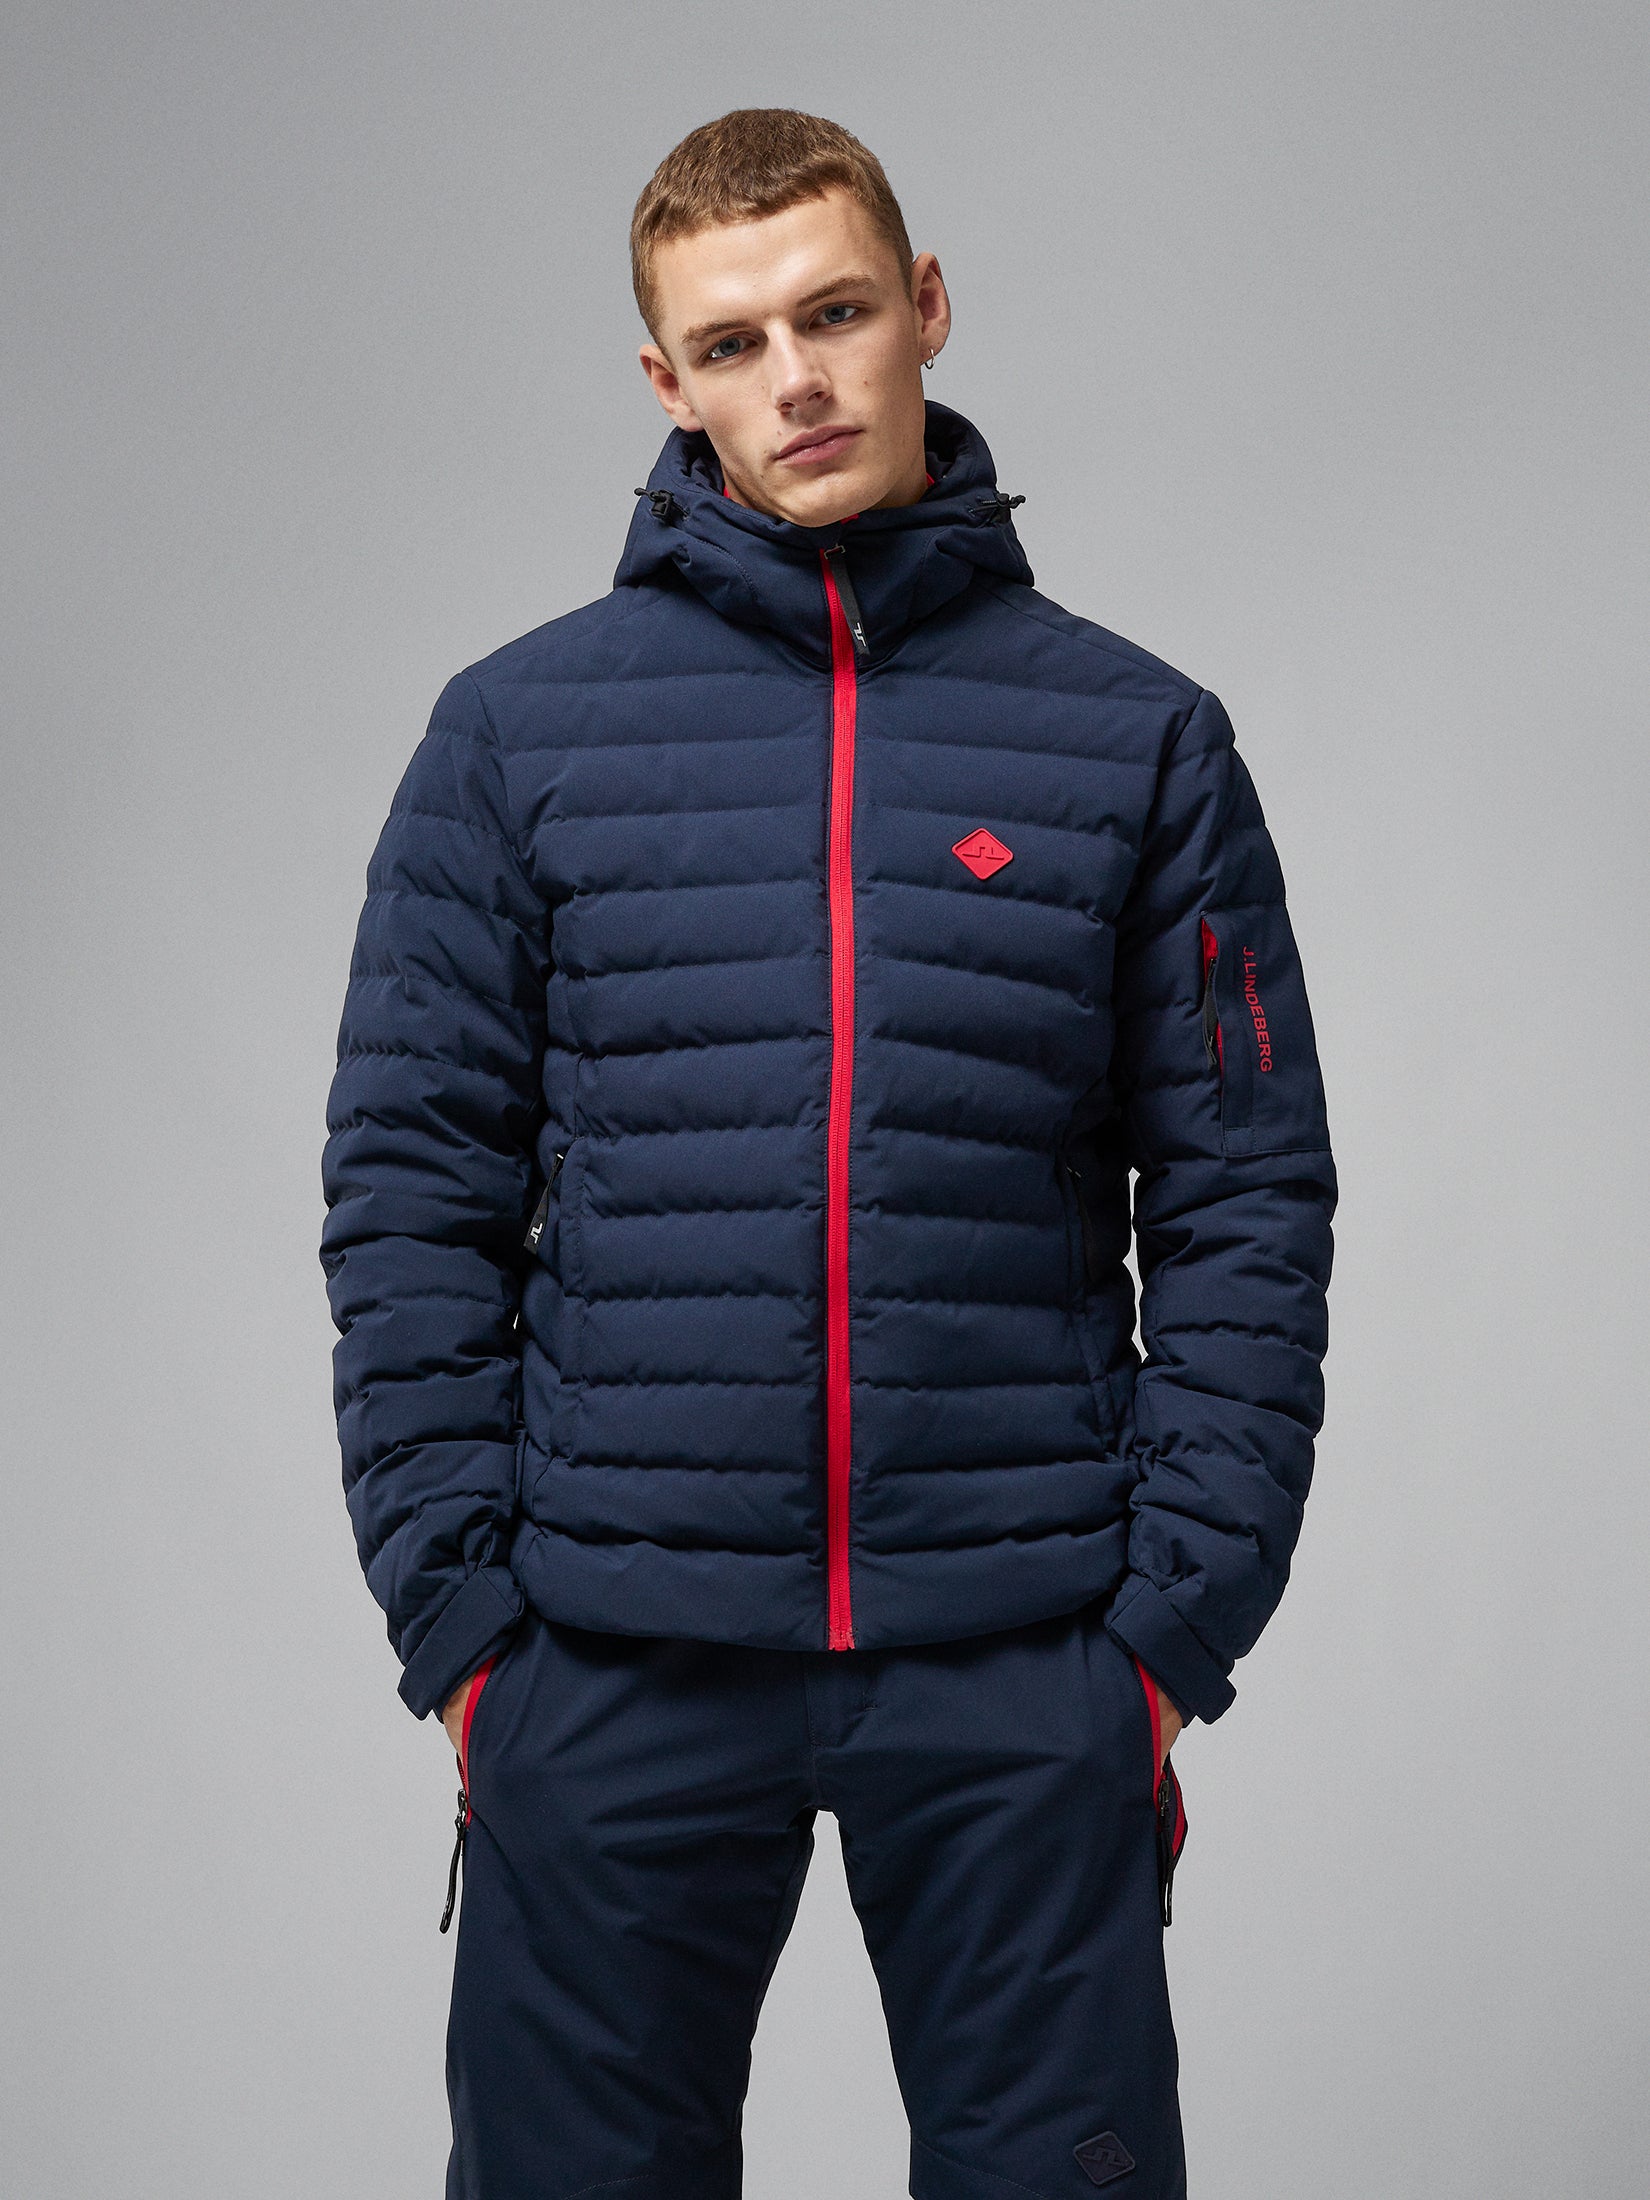 J.LINDEBERG Thermic Pro Down Jacket